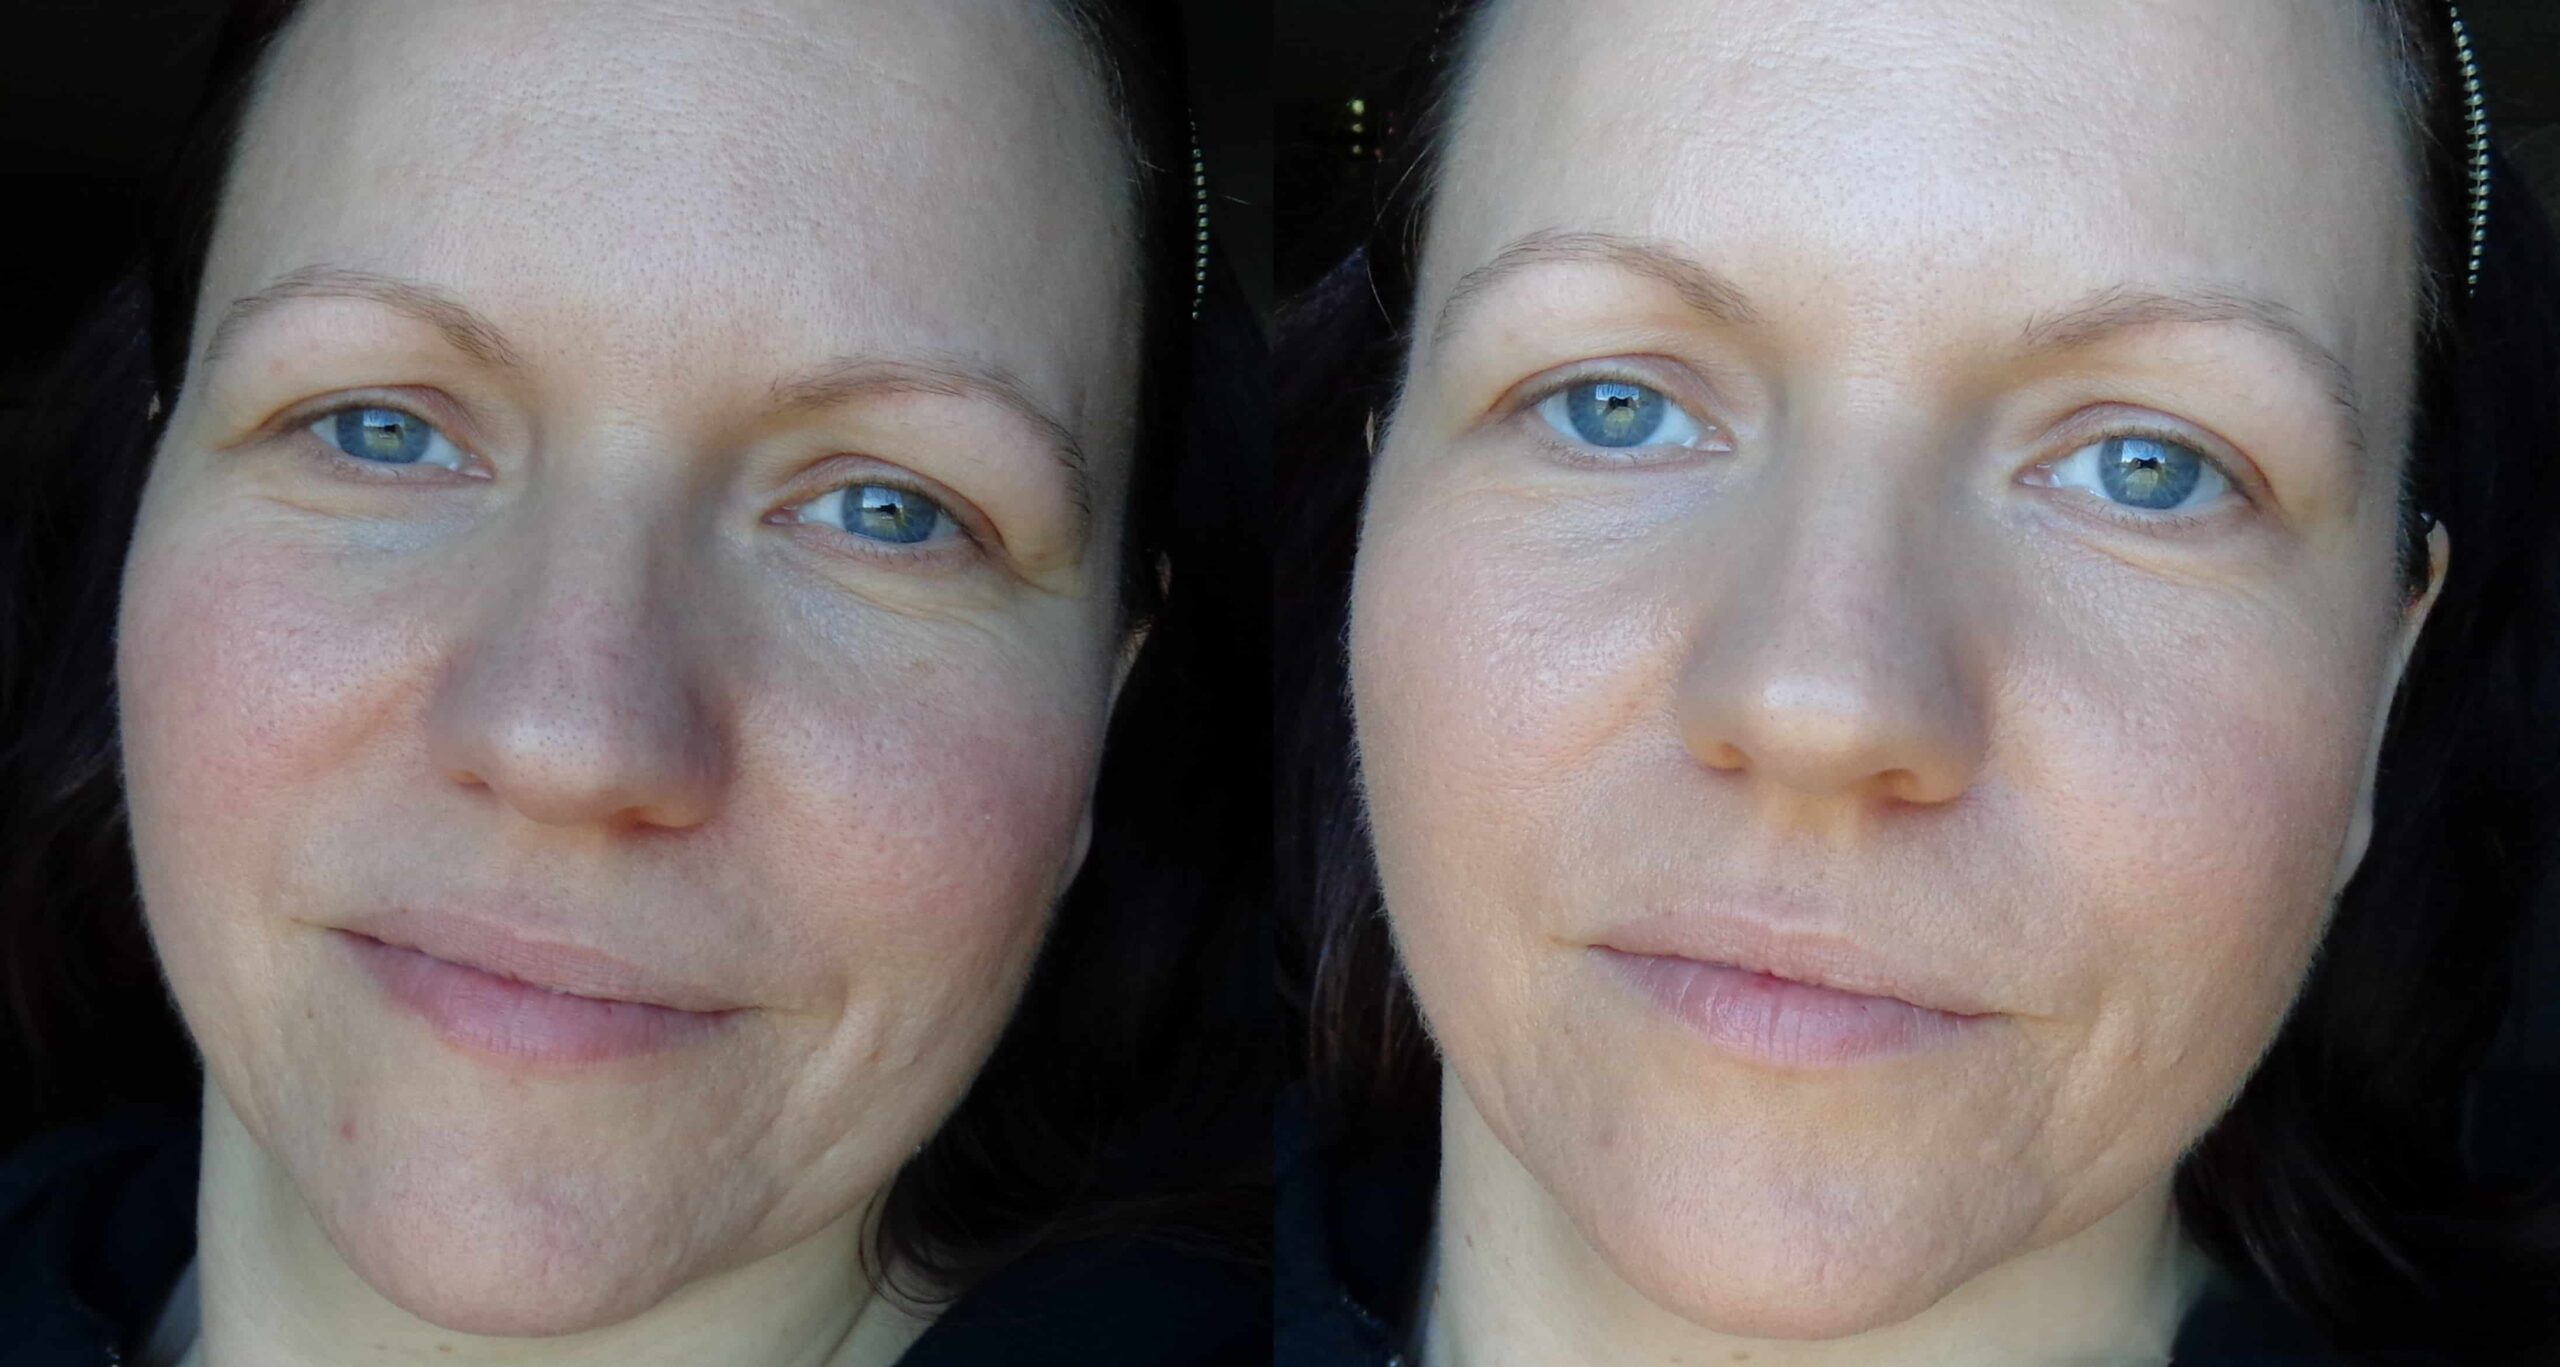 Matte bb cream before and after